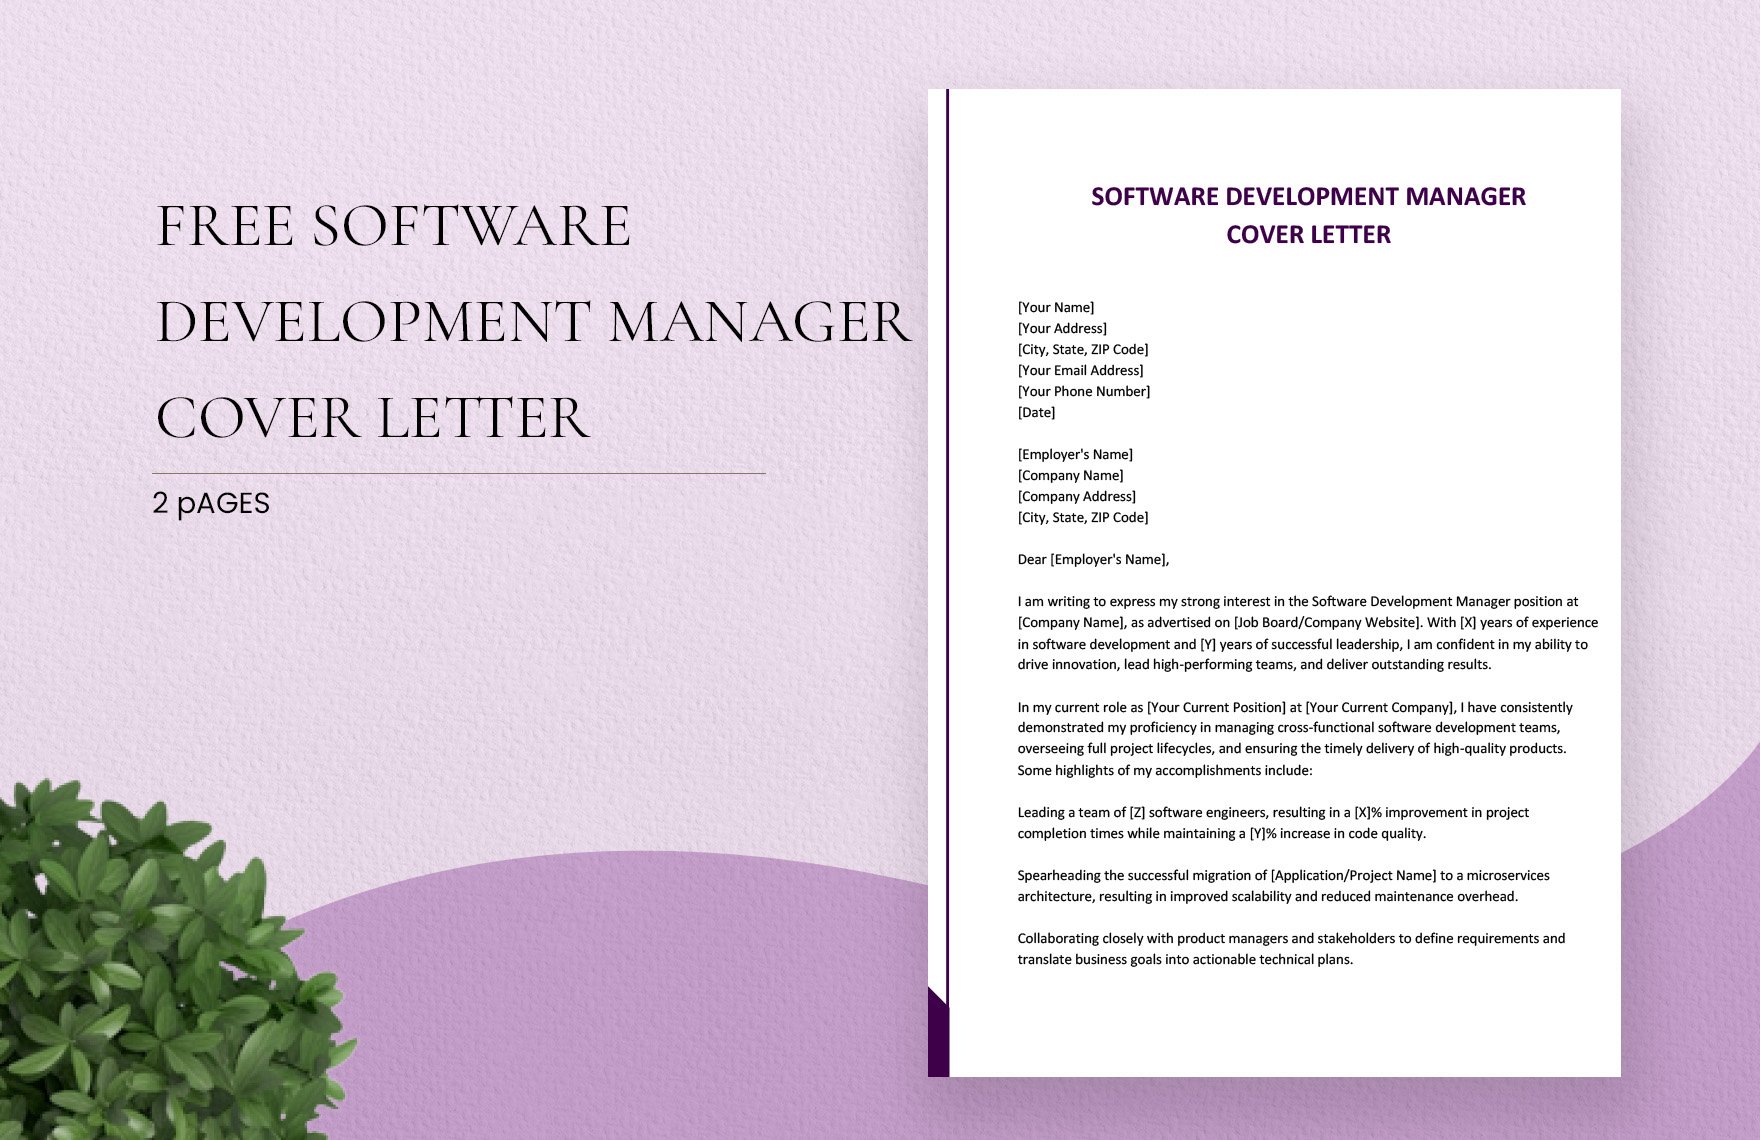 Software Development Manager Cover Letter in Word, Google Docs